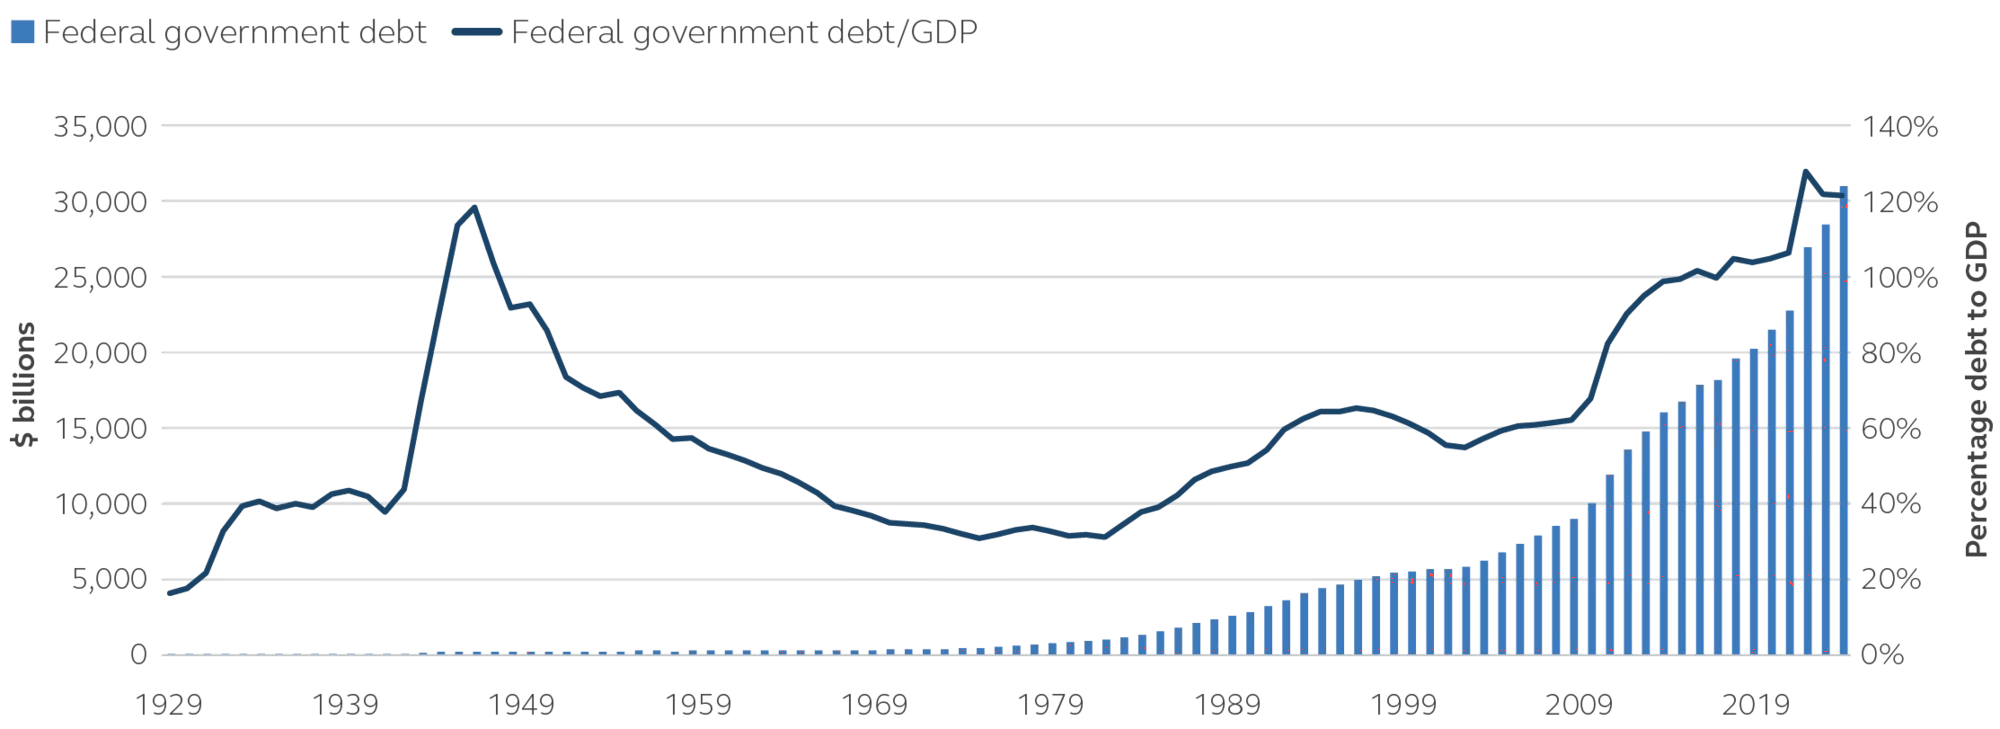 U.S. federal government debt to GDP, 1929-2022